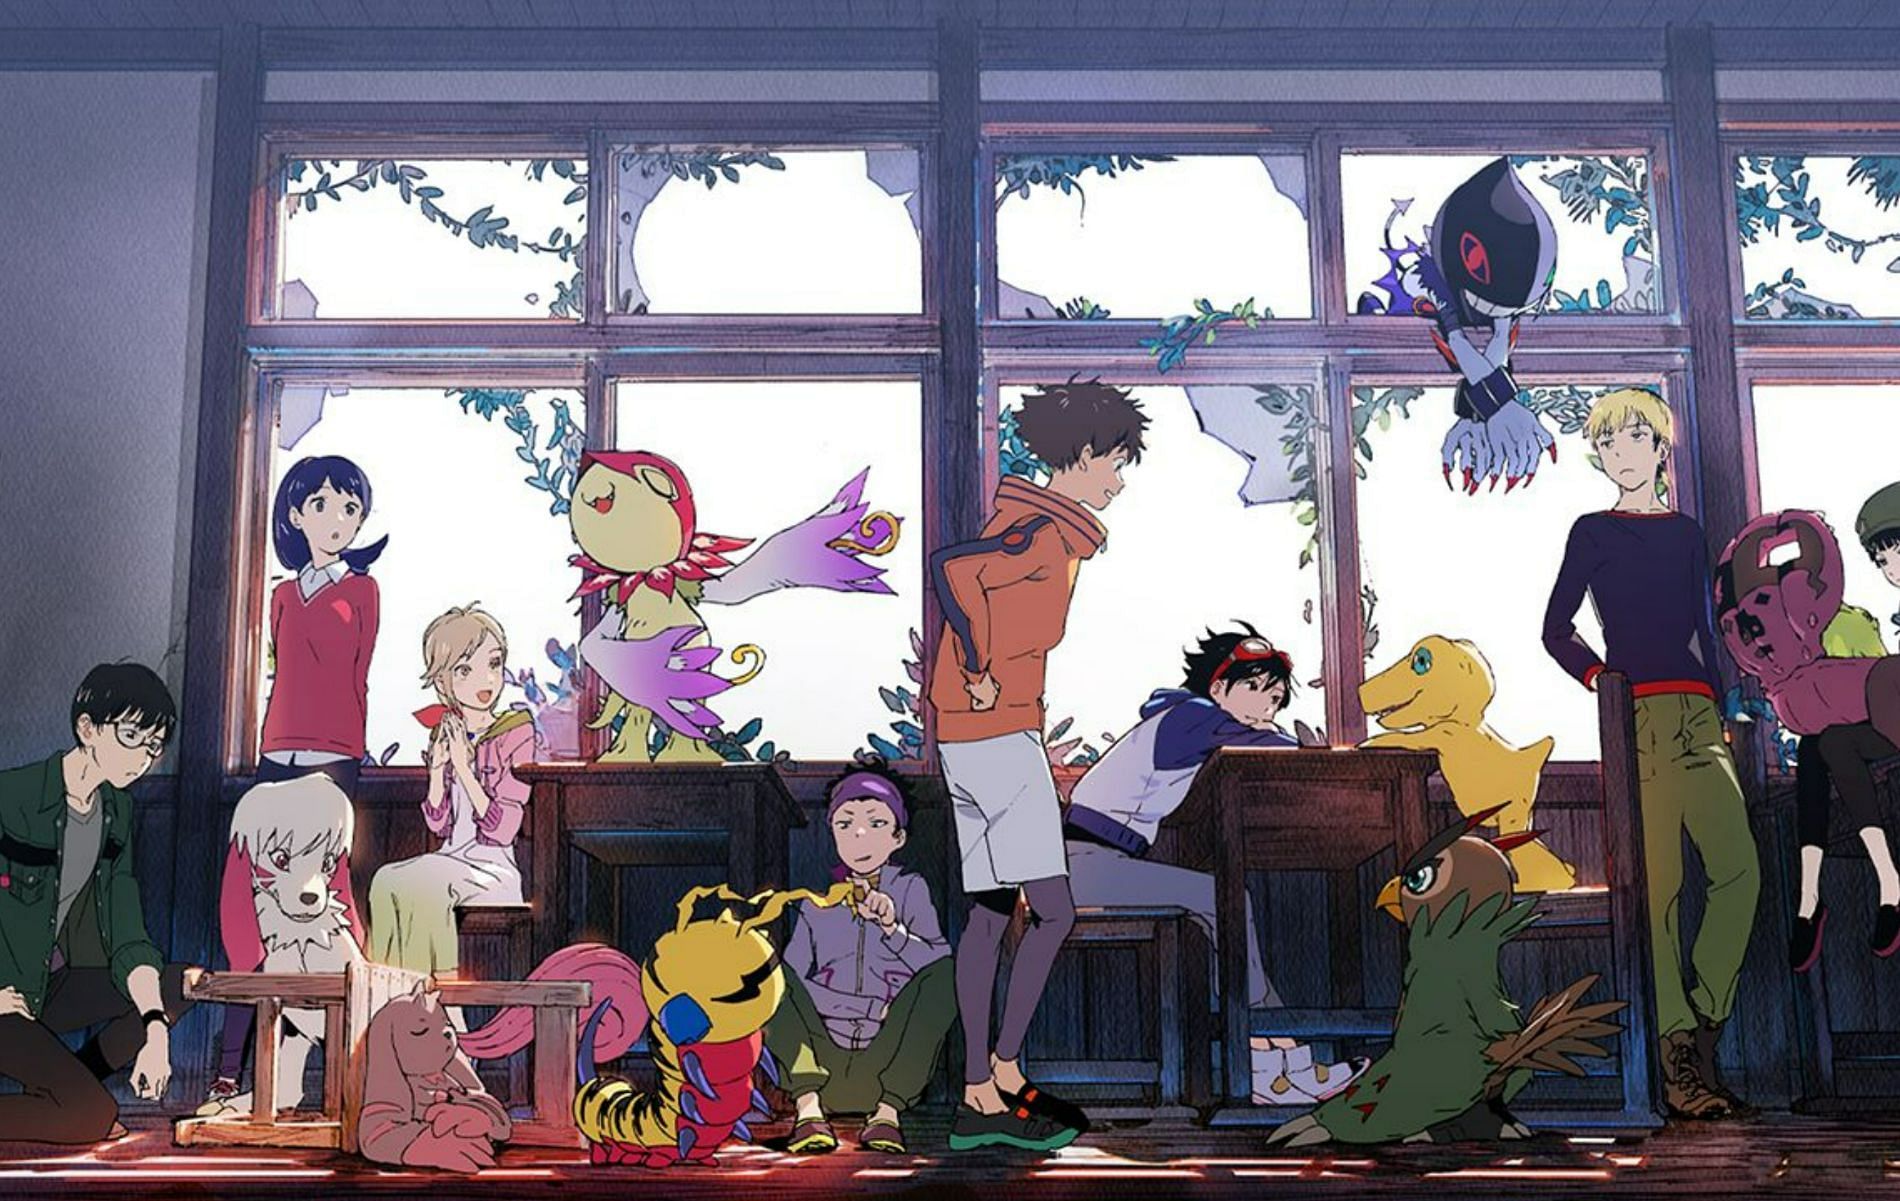 Just how long is the new game Digimon Survive? (Image via Bandai Namco)